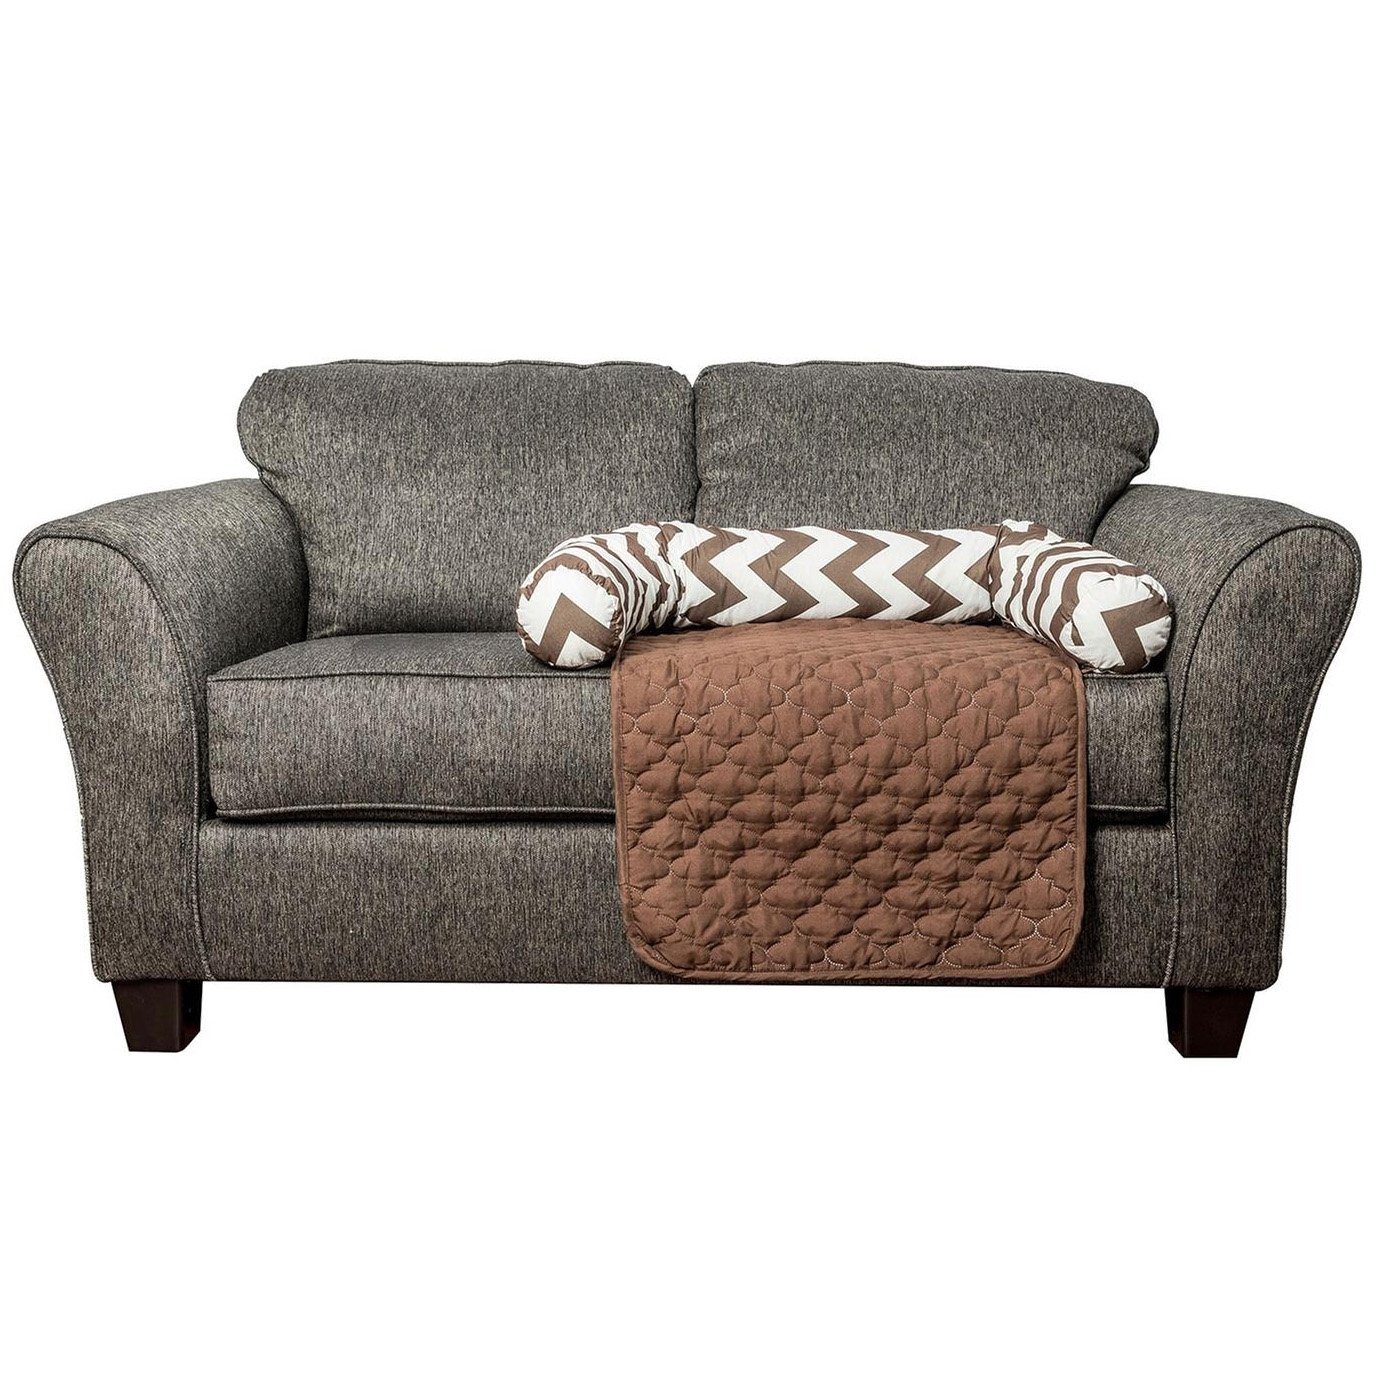 Chevron Reversible Quilted Pet Bed Chair Cover - Assorted Sizes / Brown / Small